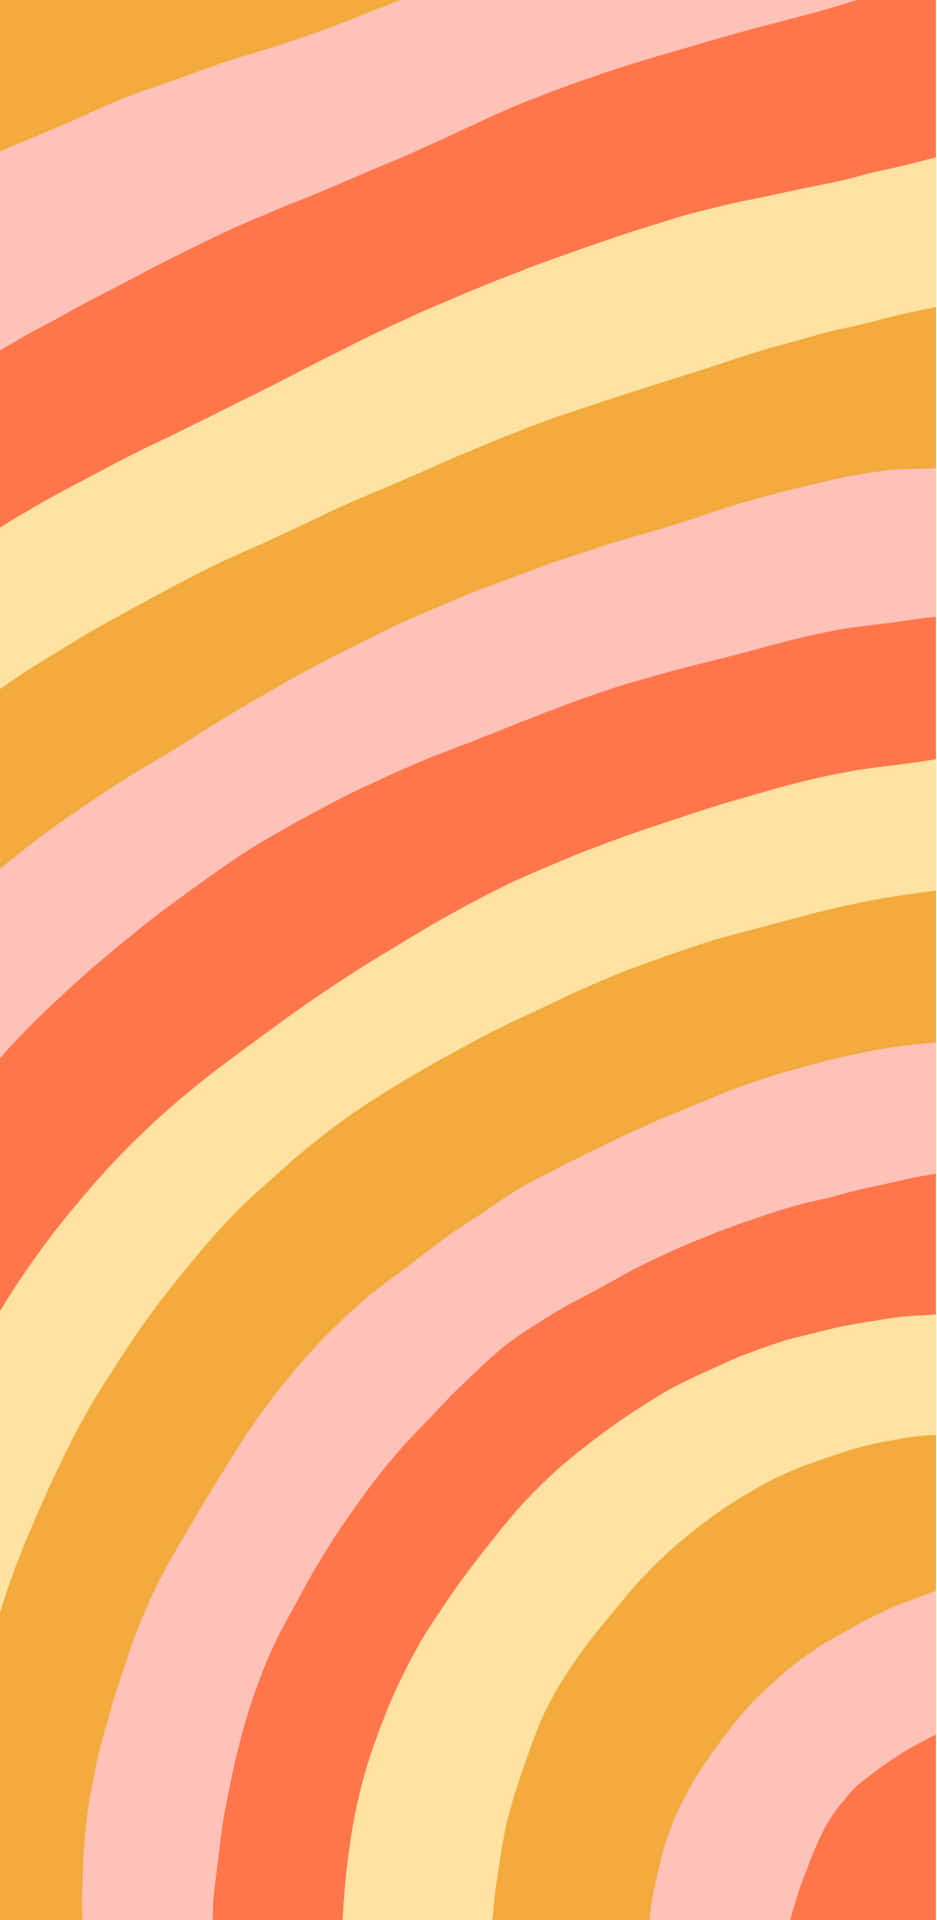 70's Groovy Background Pink Orange And Yellow Curved Pattern